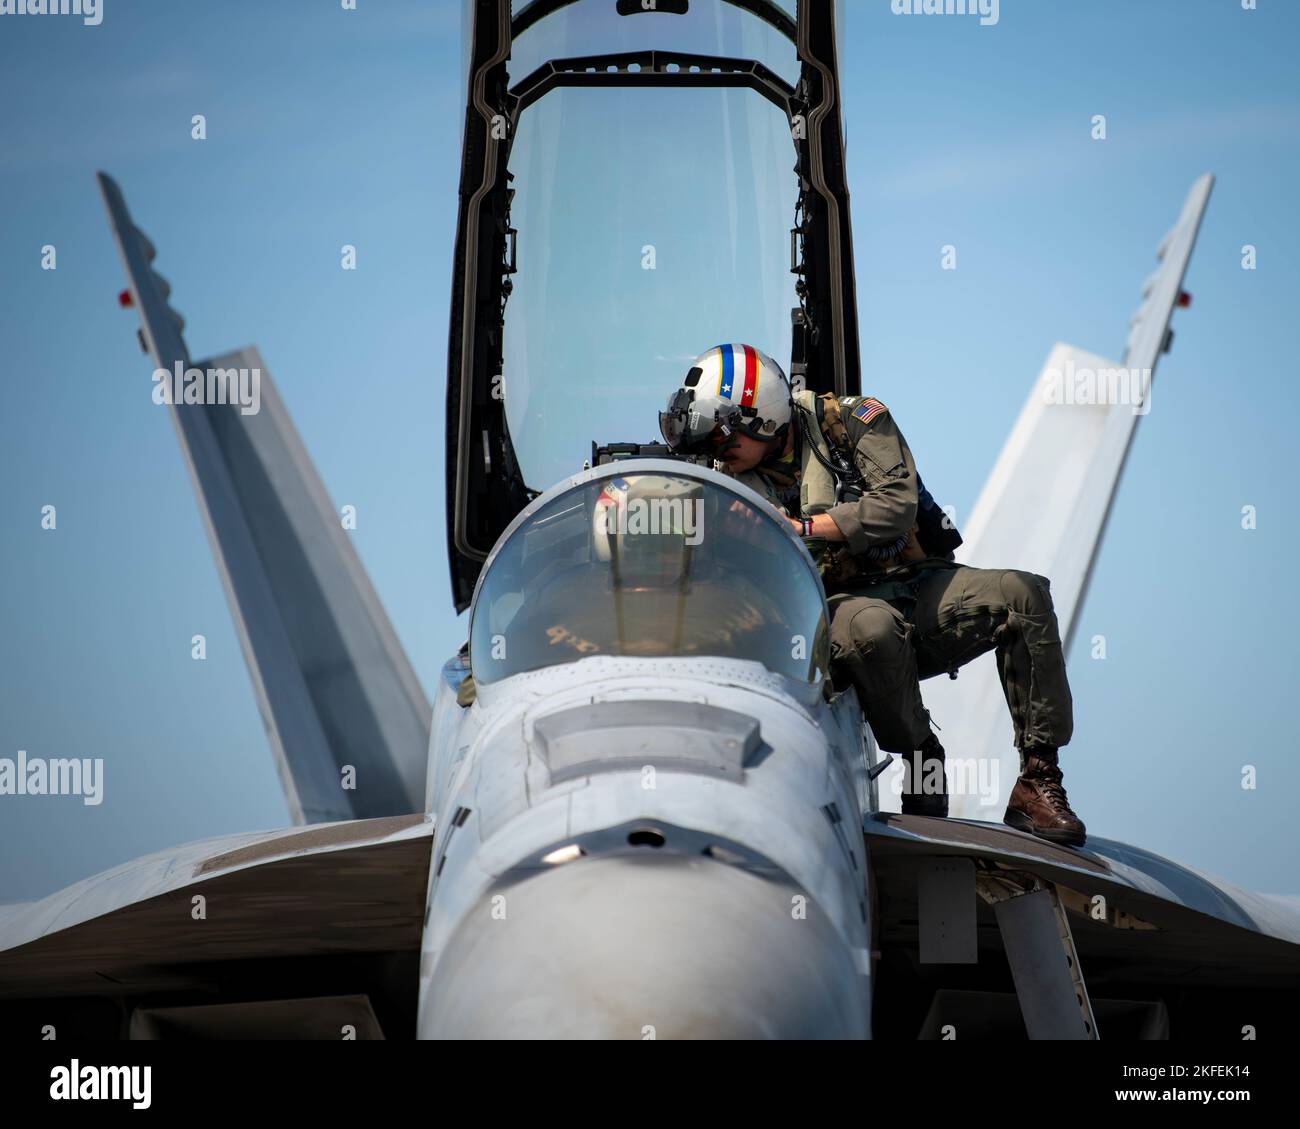 A U.S. Navy pilot with the Strike Fighter Squadron (VFA) 2, Naval Air Station Lemoore, California, exits a F/A-18 Super Hornet during Weapons System Evaluation Program-East 22.12 at Tyndall Air Force Base, Florida, Sept. 12, 2022. WSEP-E 22.12 is a formal, two-week evaluation exercise designed to test a squadron’s capabilities to conduct live-fire weapons systems during air-to-air combat training missions. Stock Photo